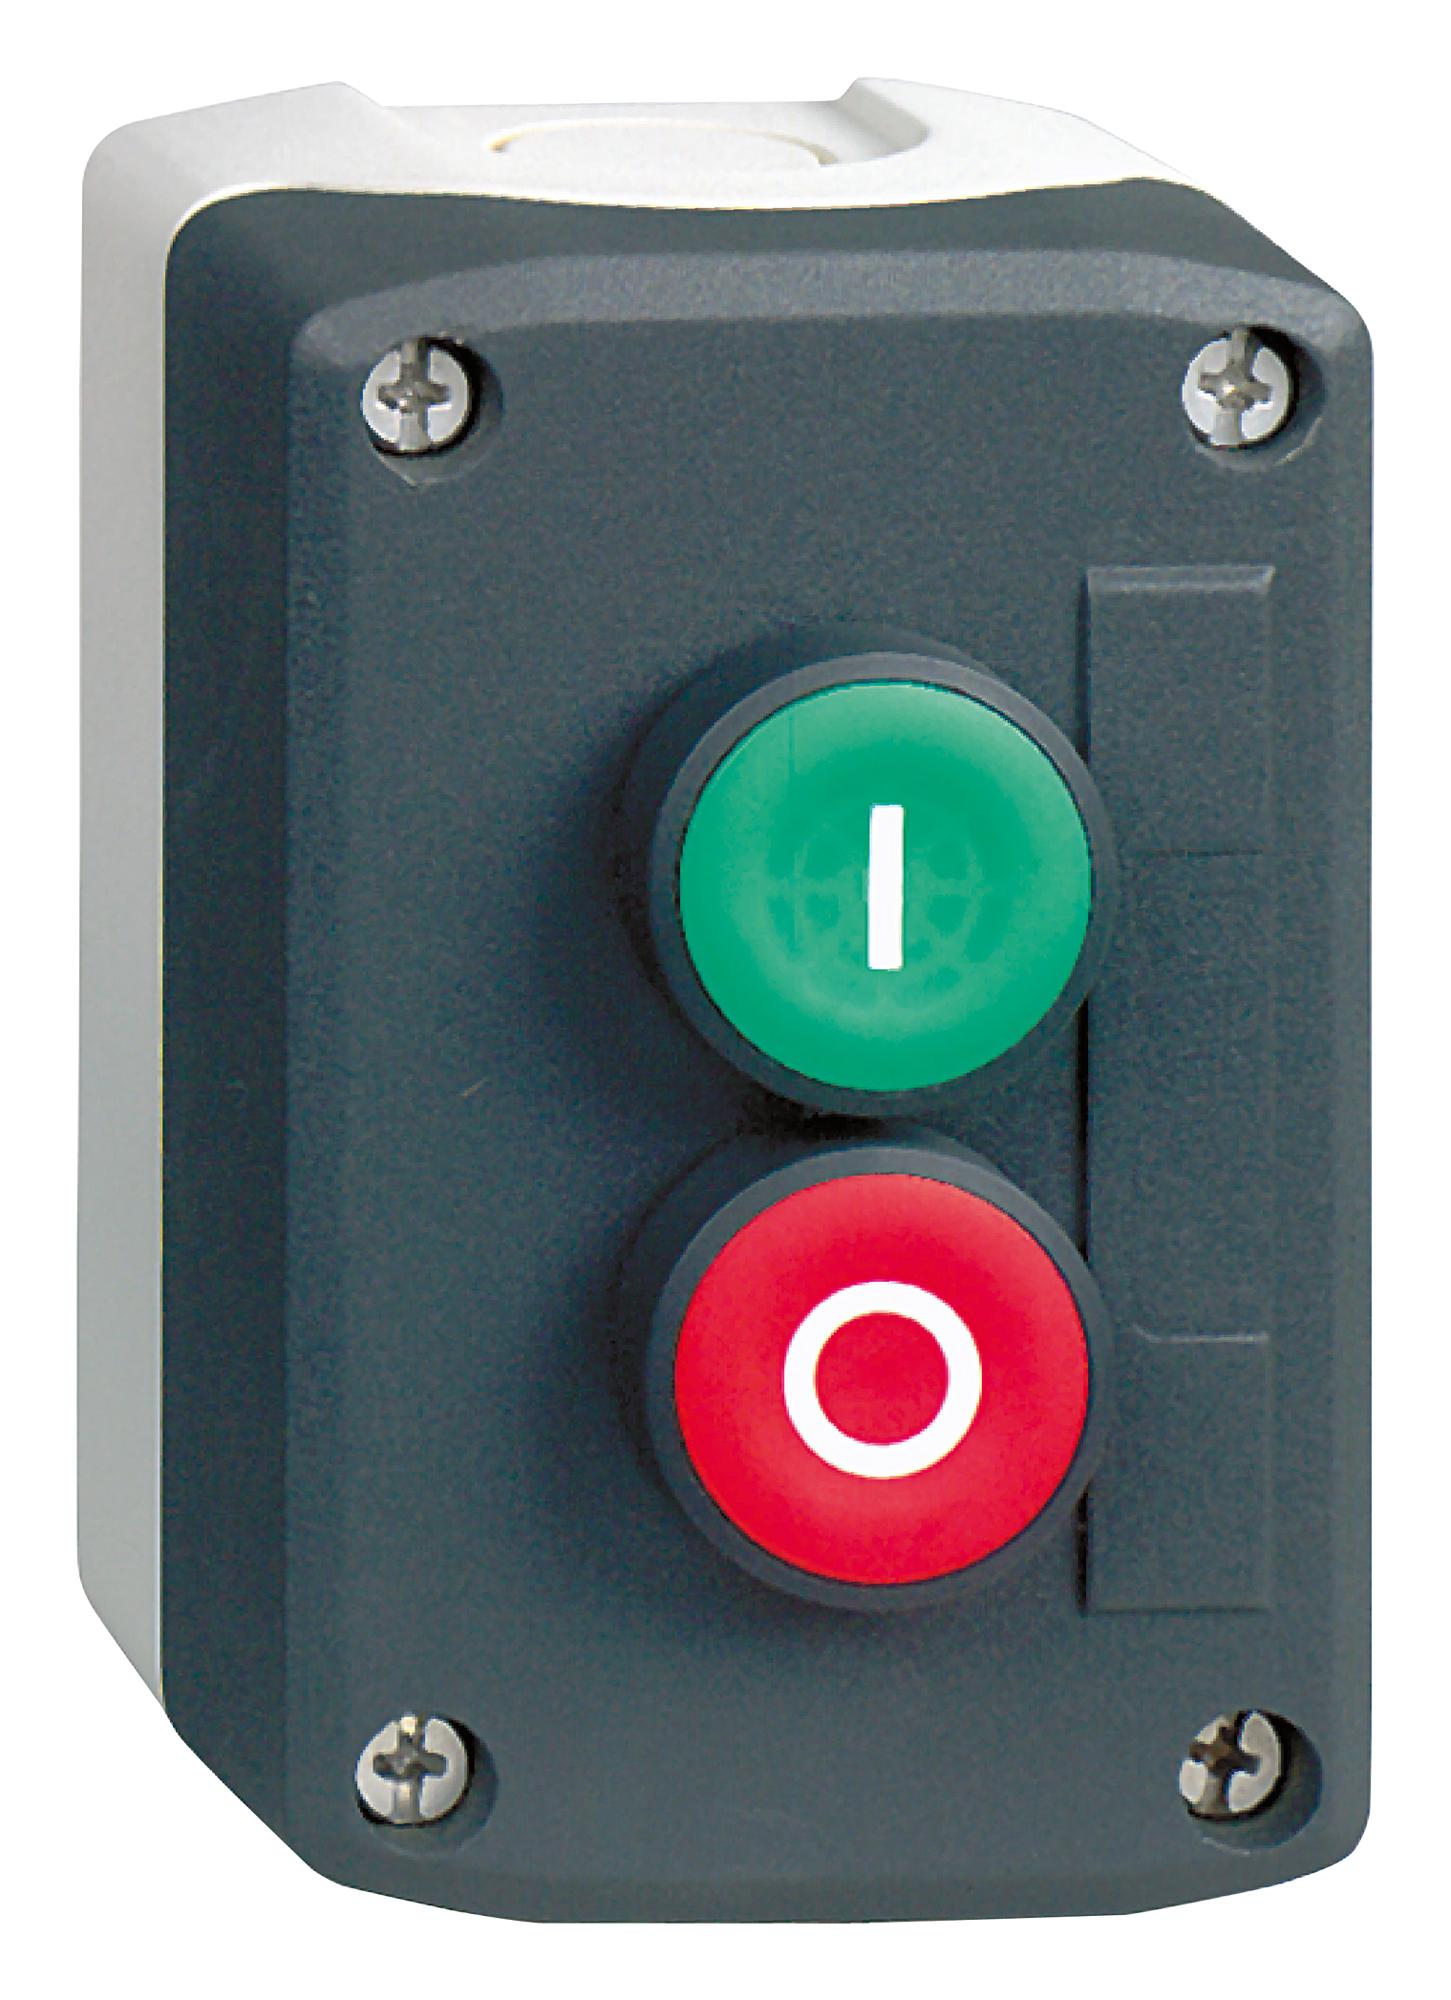 XALD214 CONTROL STATION, 2 PUSH BUTTONS SCHNEIDER ELECTRIC